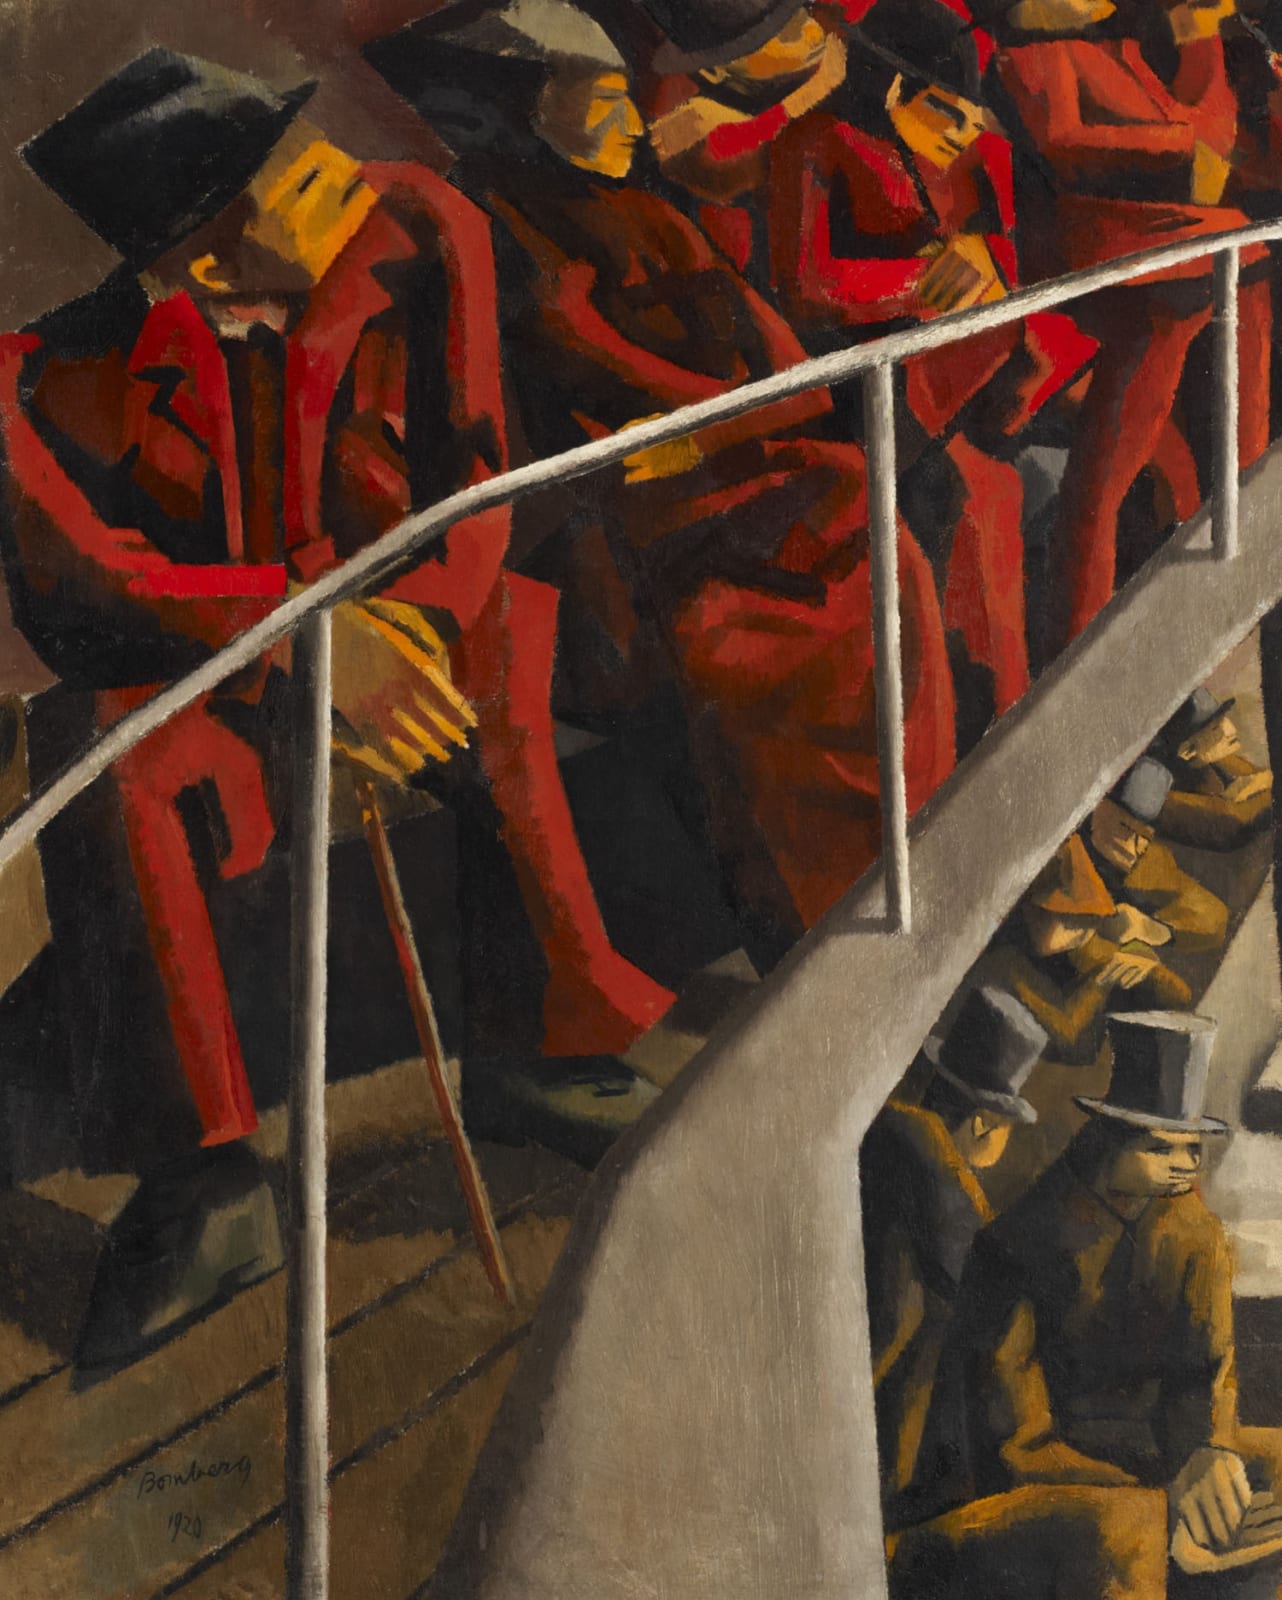 David Bomberg (1890-1957) Ghetto Theatre 1920 Oil on canvas 74.4 x 62 cm Ben Uri Collection © David Bomberg estate To see and discover more about this artist click here